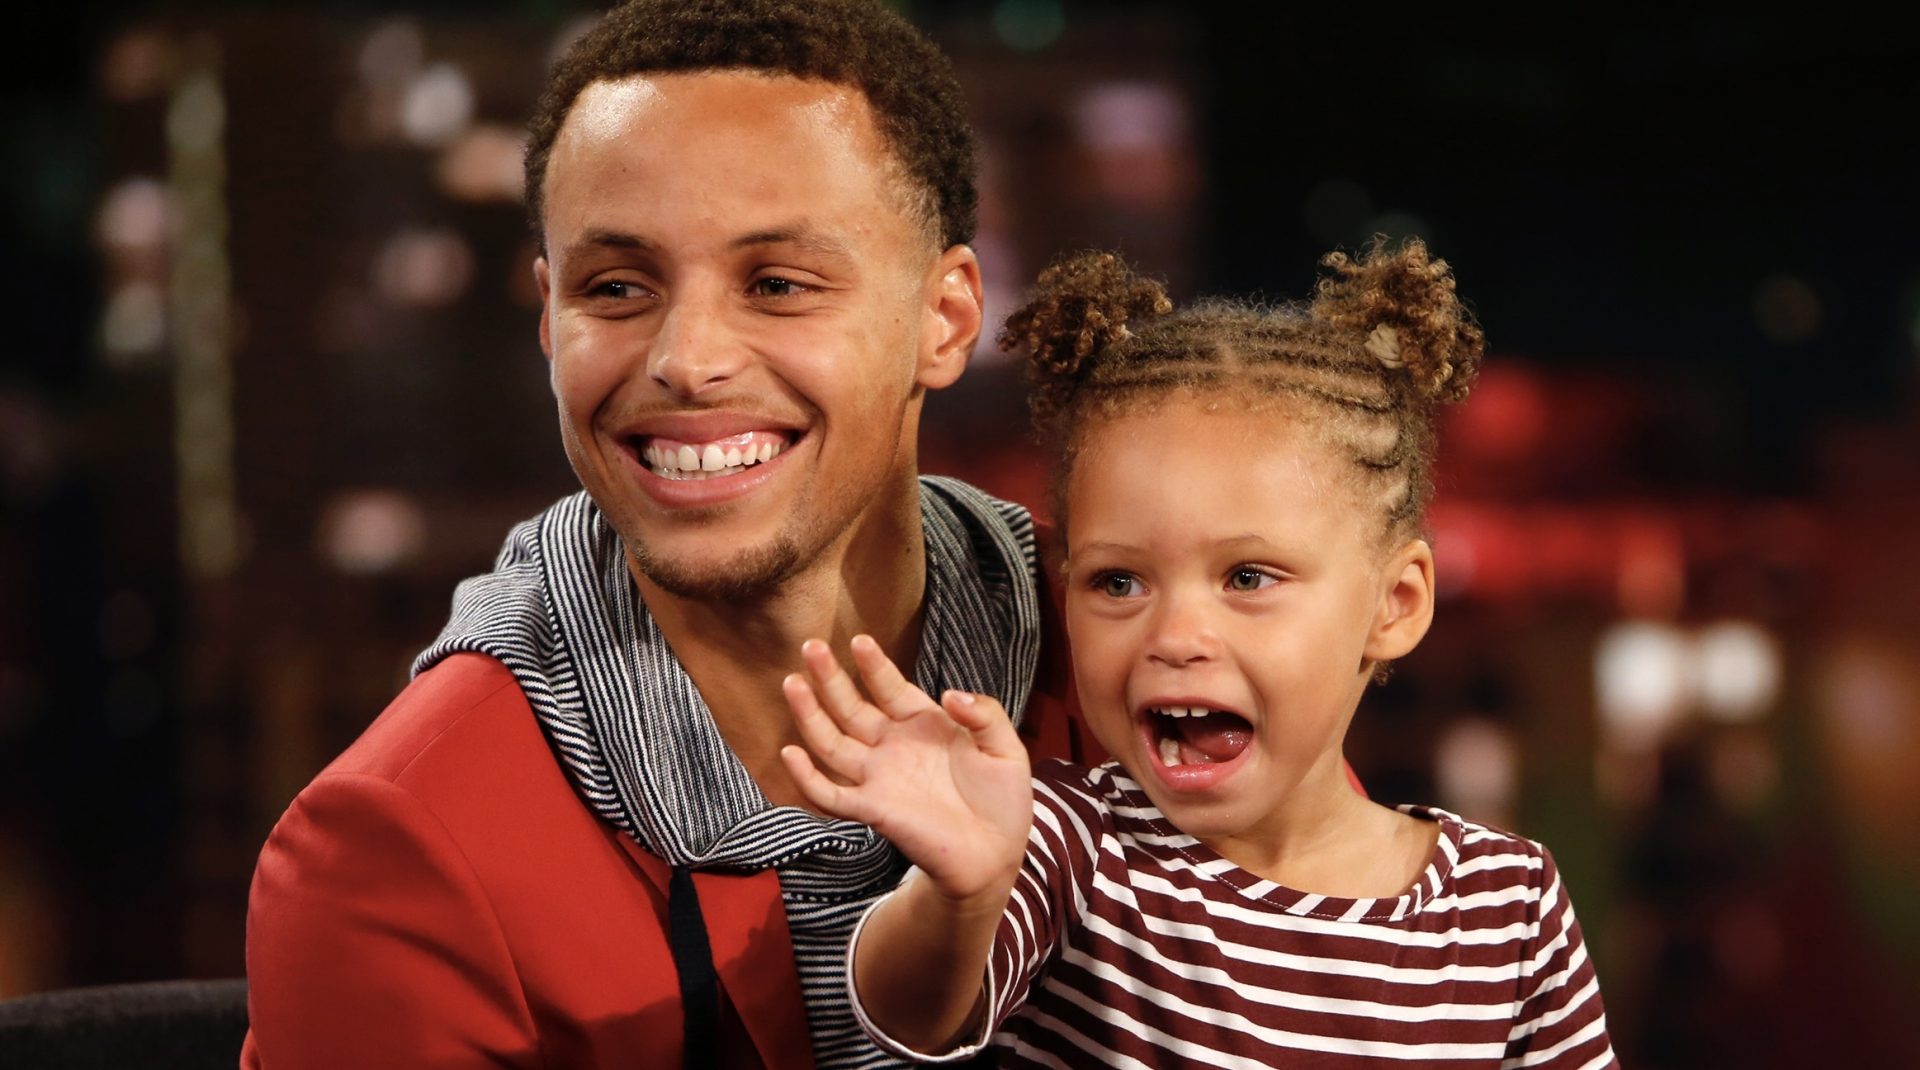 How old is steph curry's daughter